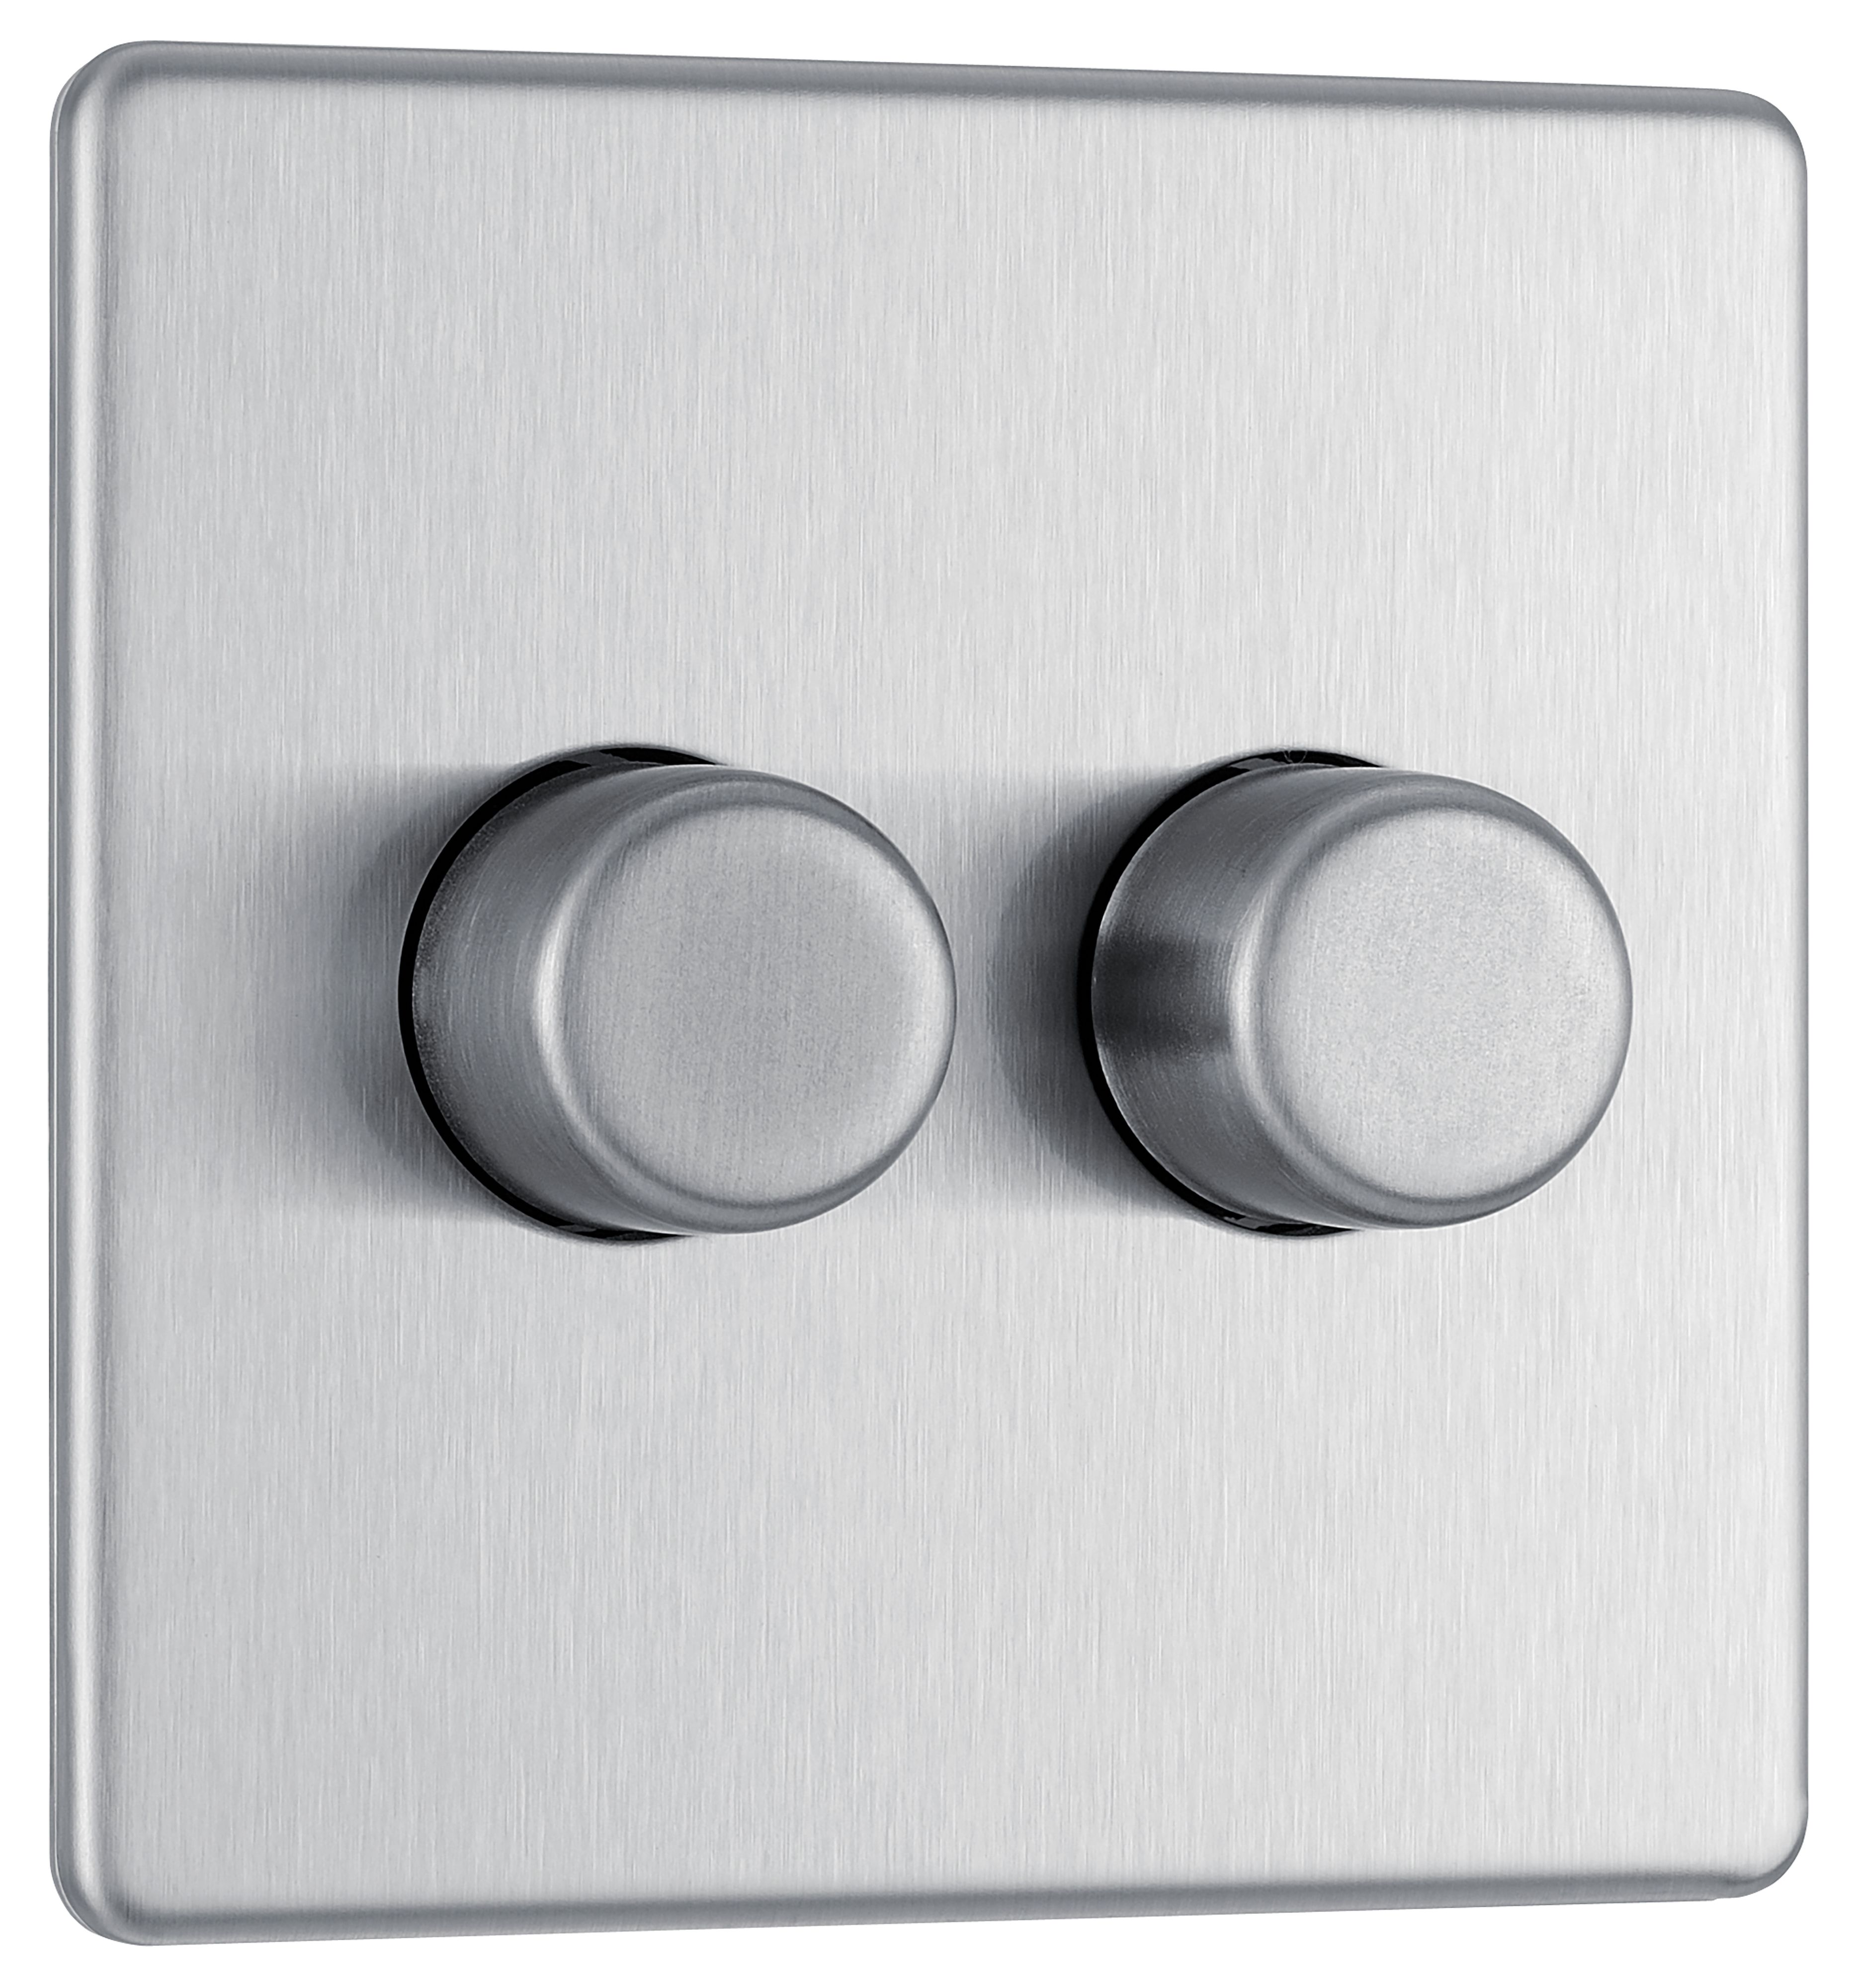 GoodHome Brushed Steel profile Double 2 way 400W Screwless Dimmer switch